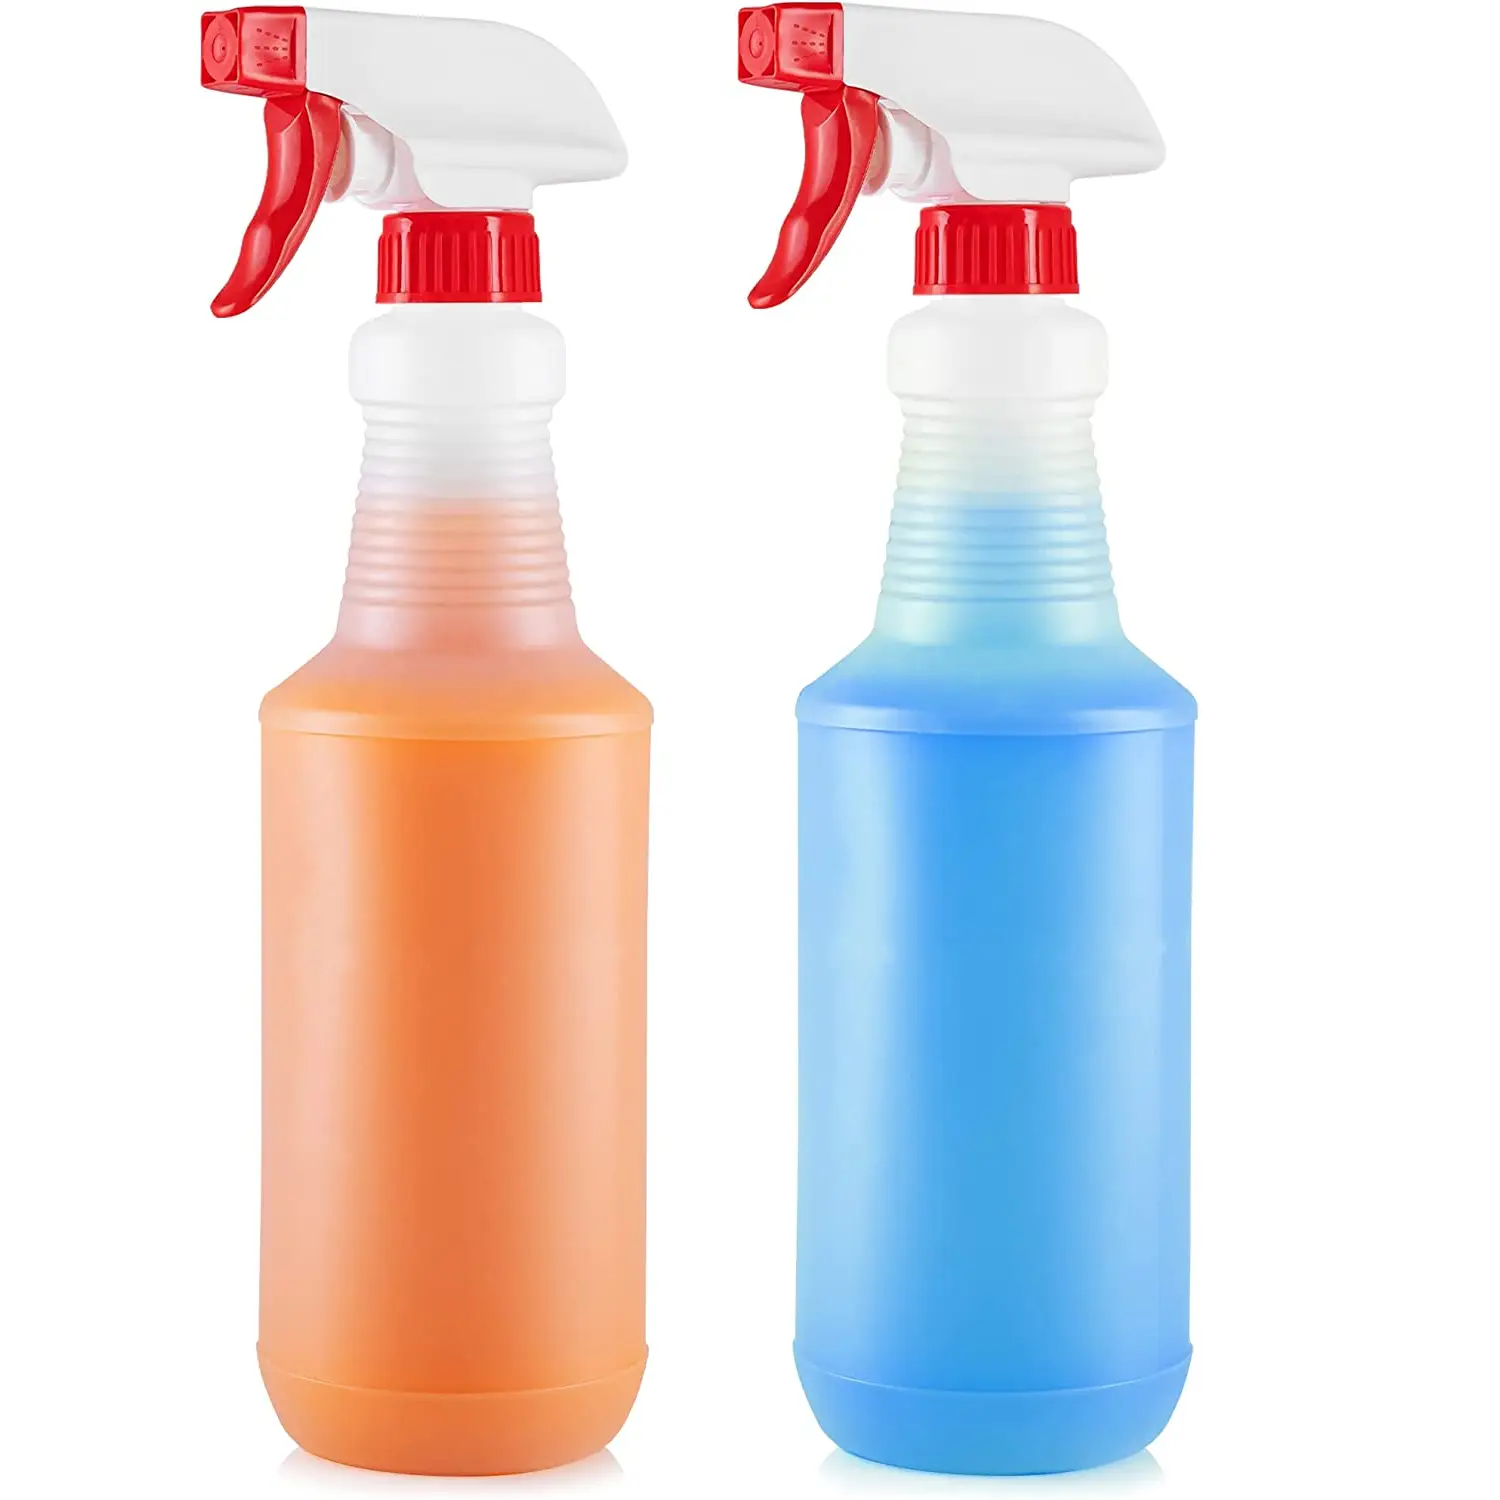 Zulay Home Plastic Spray Bottles With Adjustable Nozzle And Spring Loaded Trigger